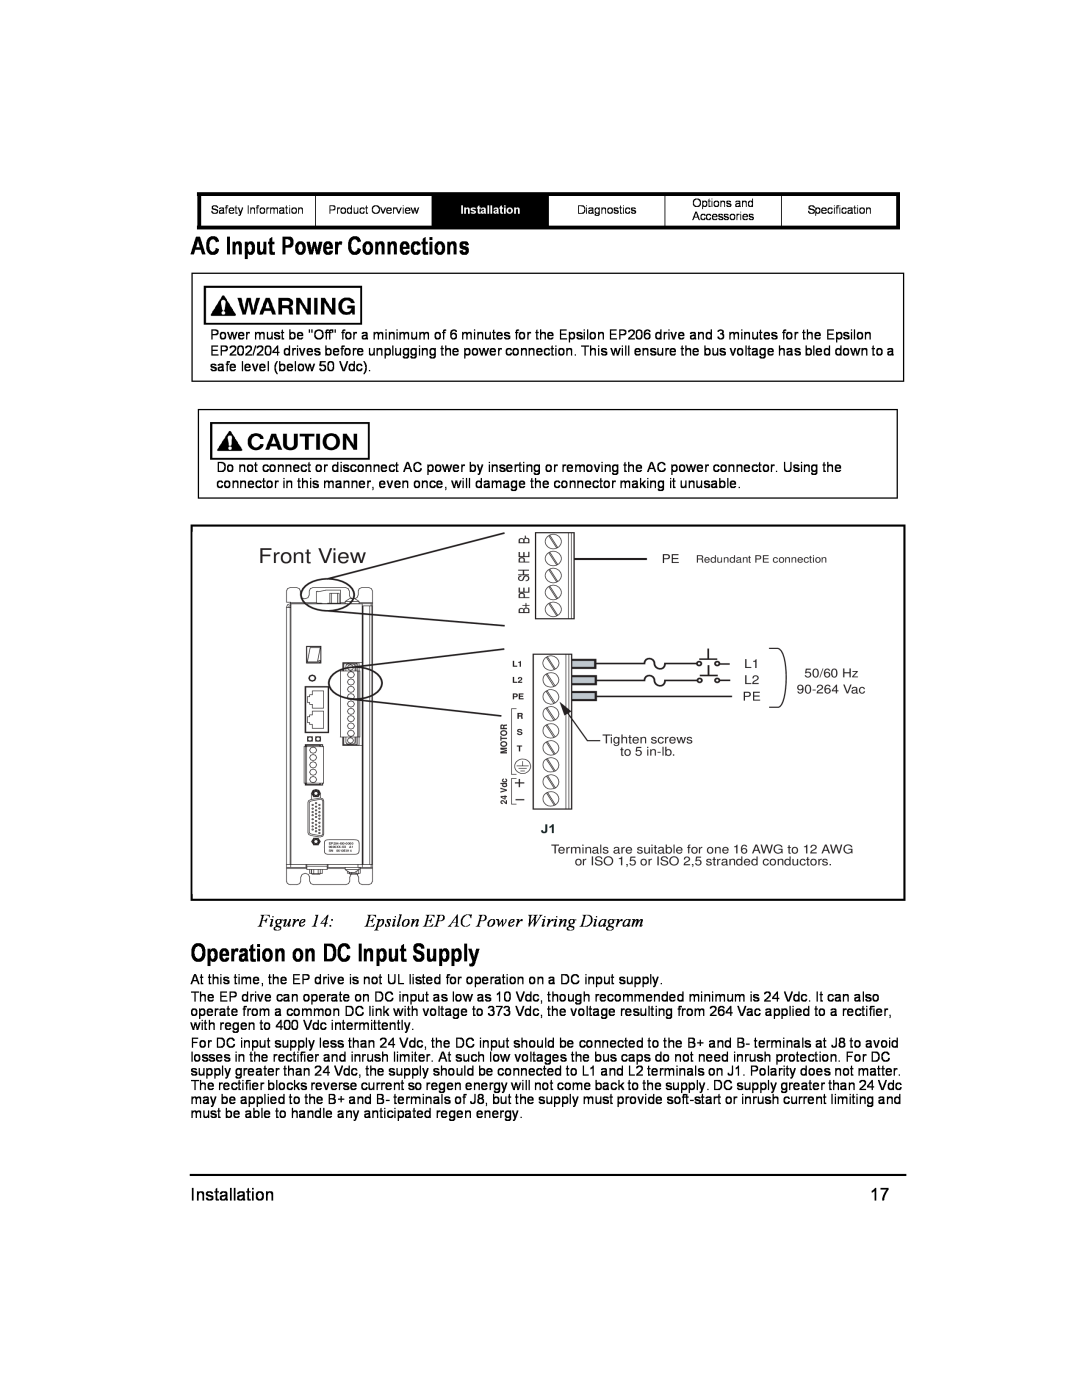 Emerson 400518-01 AC Input Power Connections, Operation on DC Input Supply, Front View, Epsilon EP AC Power Wiring Diagram 